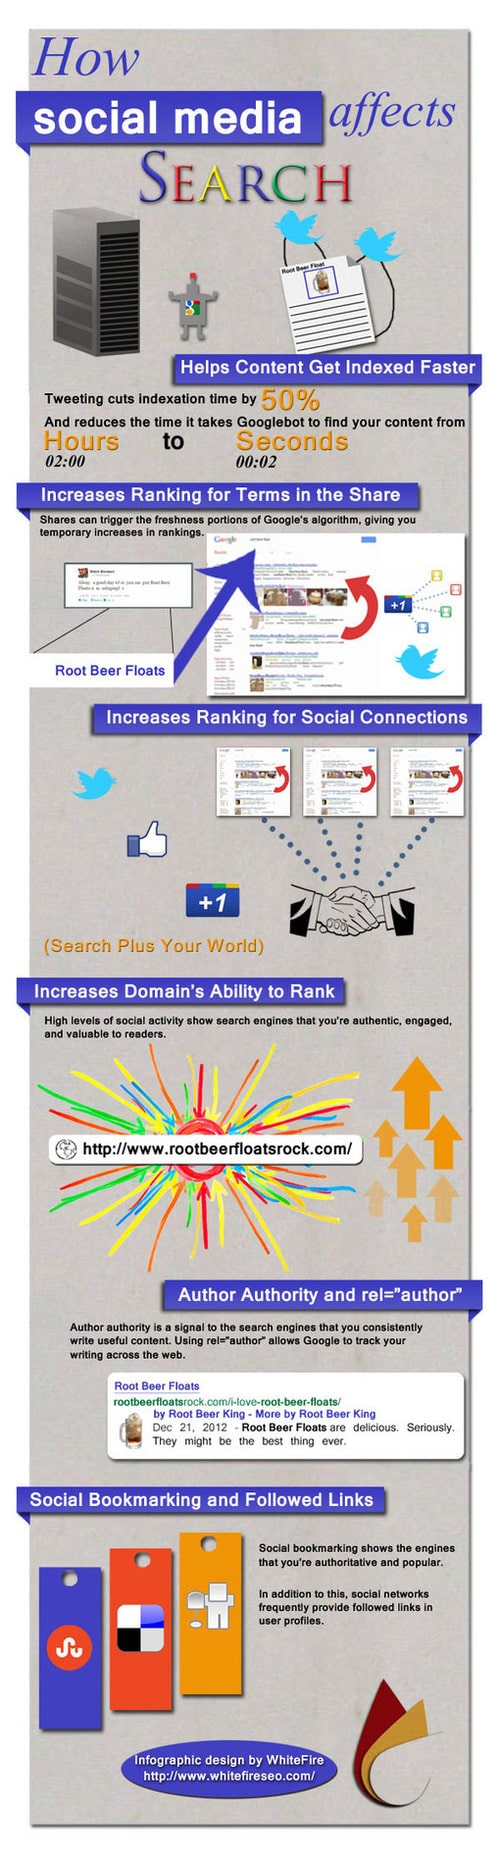 social-media-affects-search-ranking